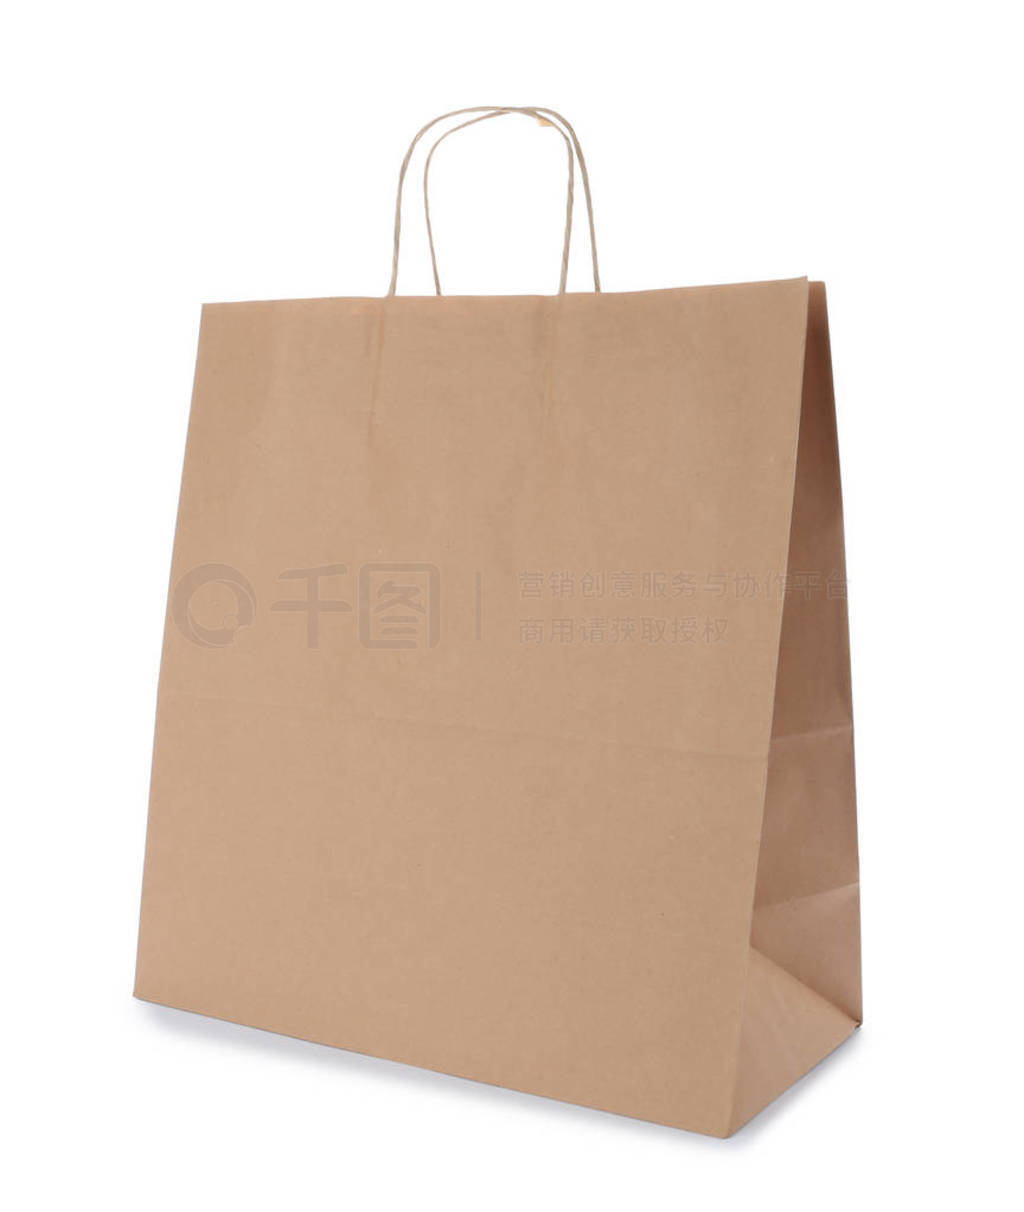 Empty craft paper bag isolated on white. Mockup for design